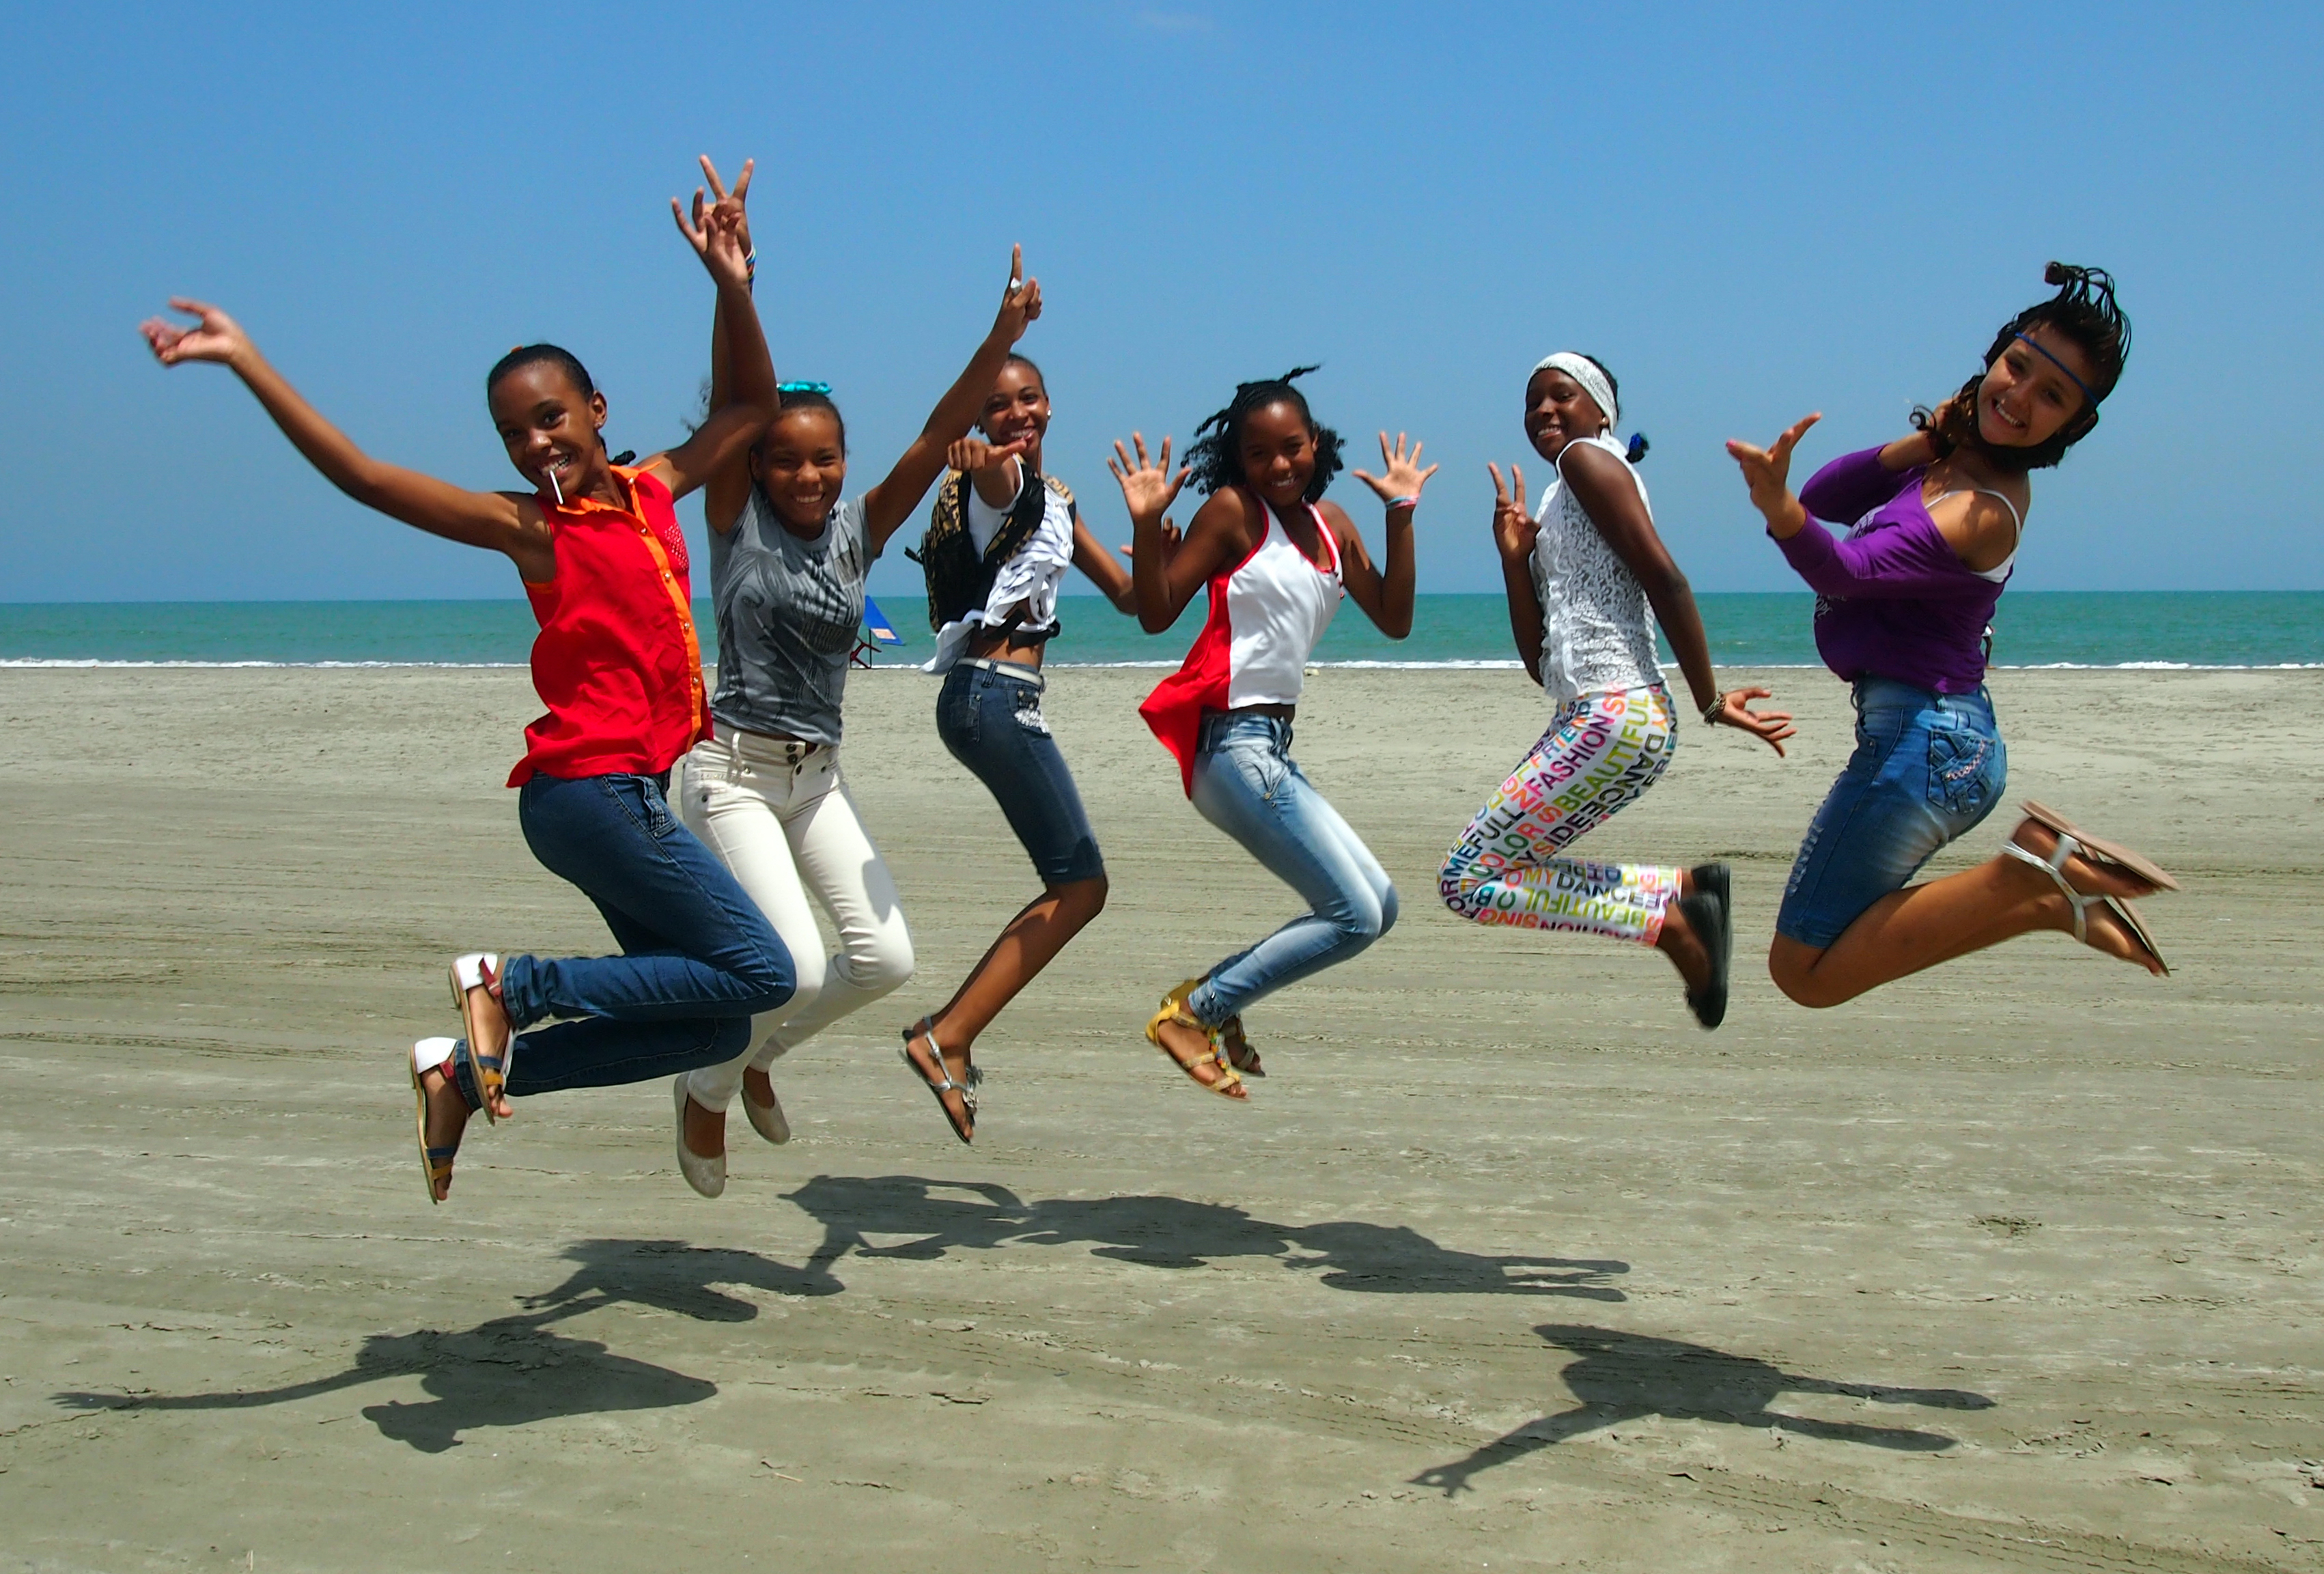 9thgrade female students jumping in air together, La Boquilla, Colombia, 2014, PC Digital Library